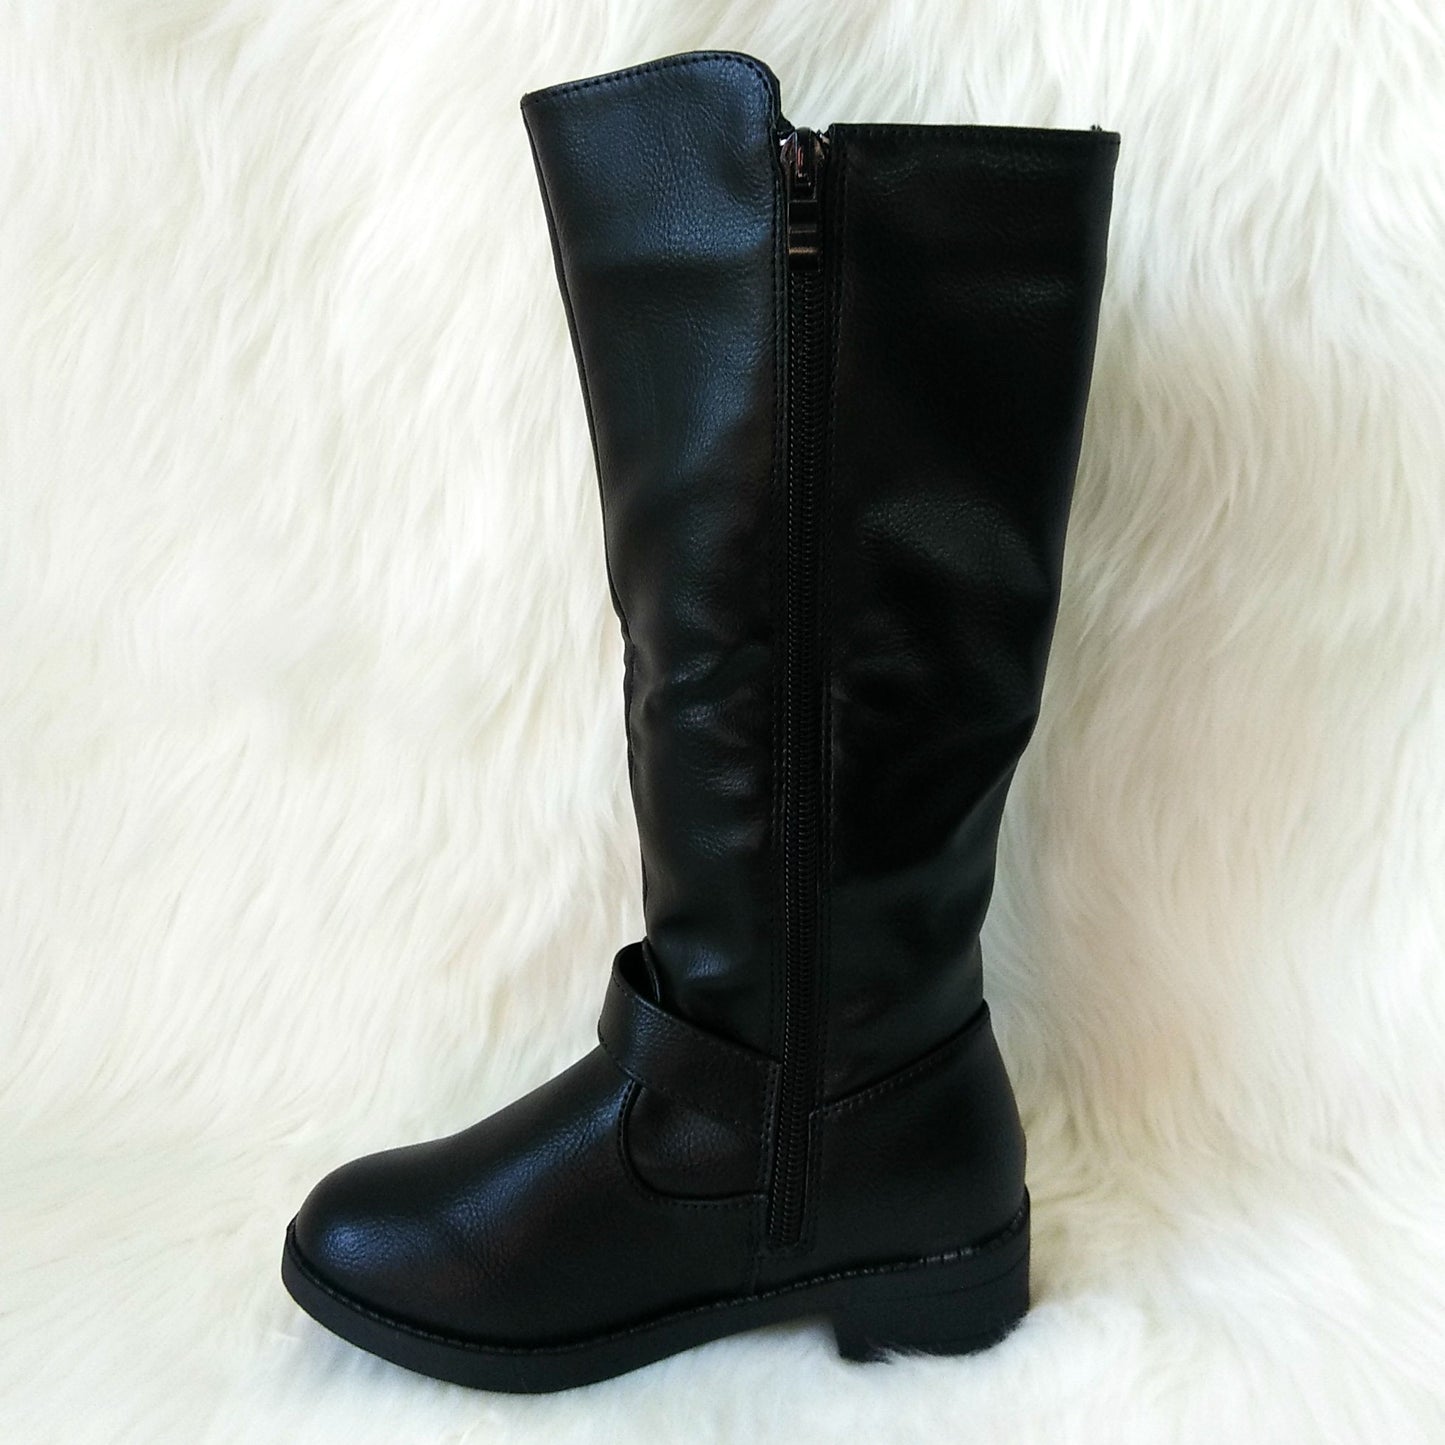 Girl's Black Tall Boot with Buckle Details